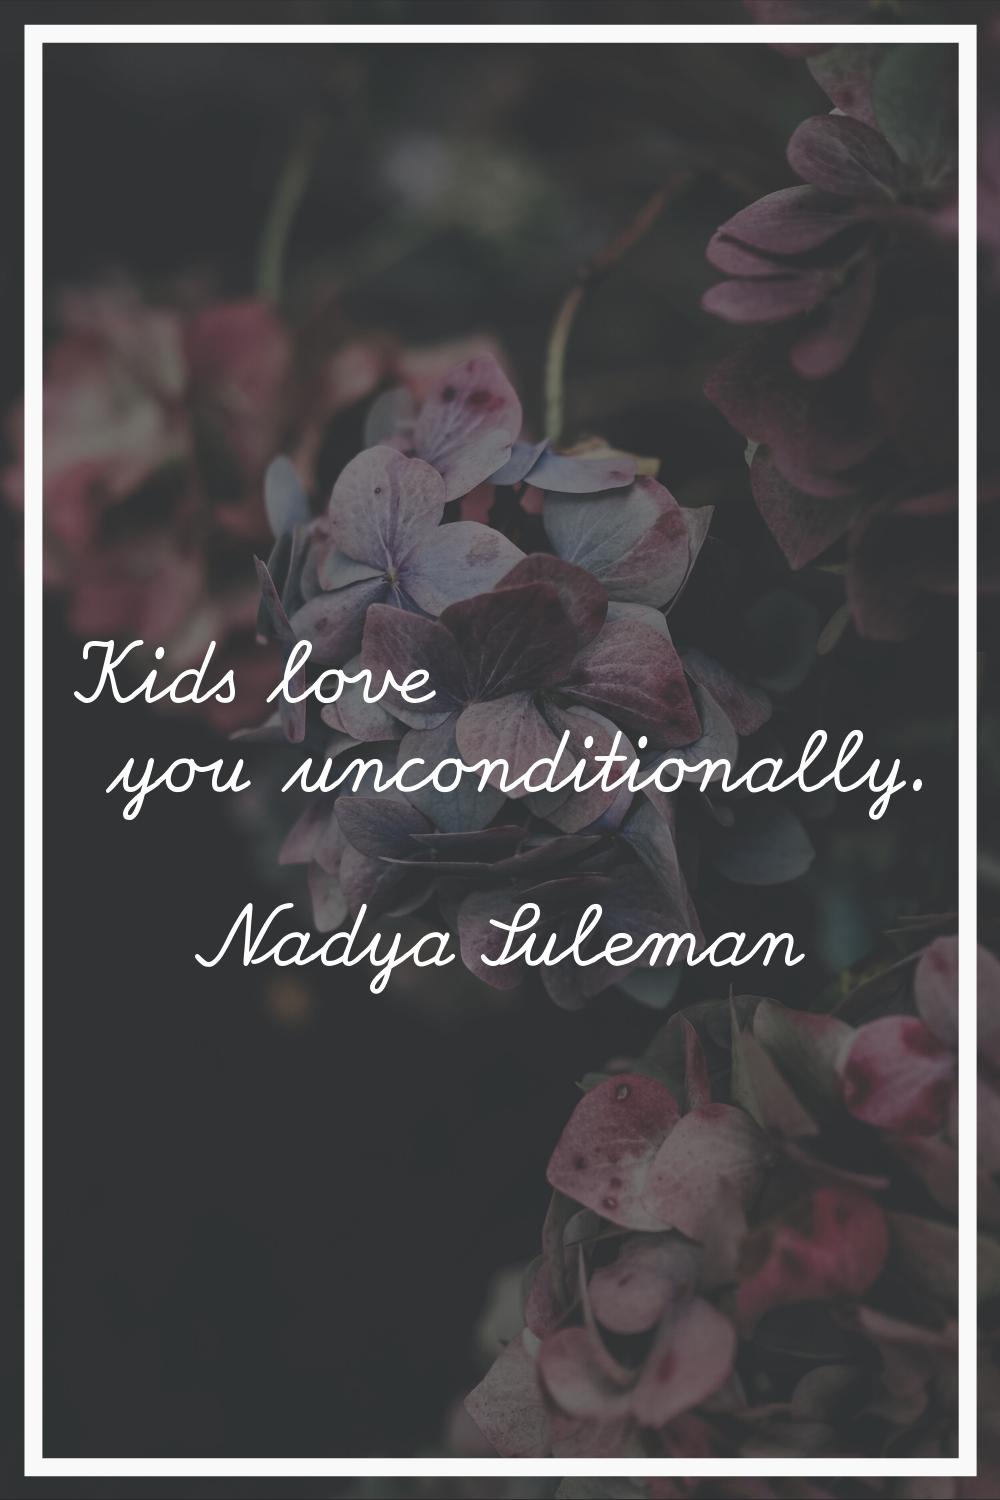 Kids love you unconditionally.